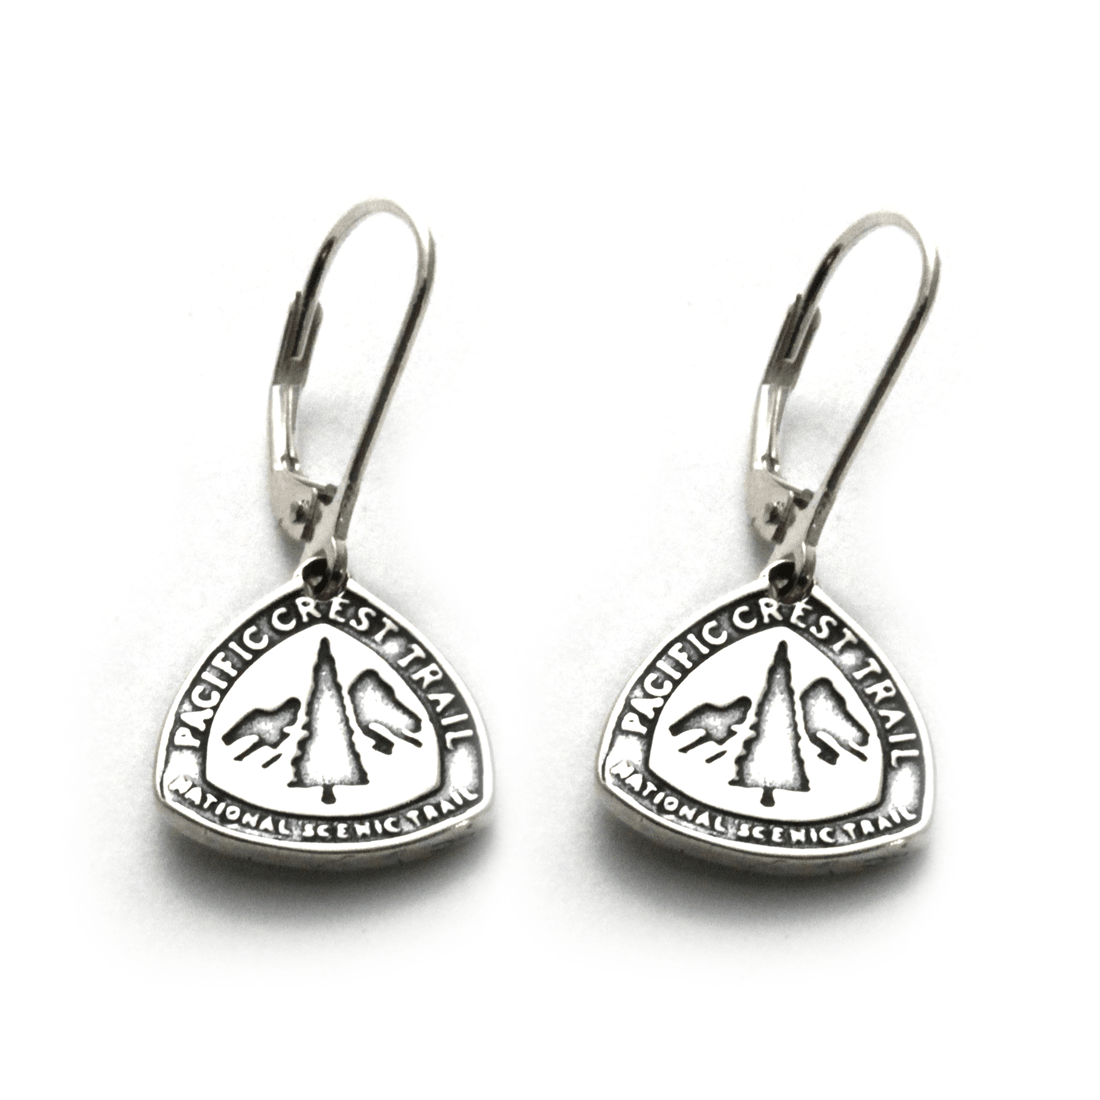 Pacific crest trail earrings in sterling silver